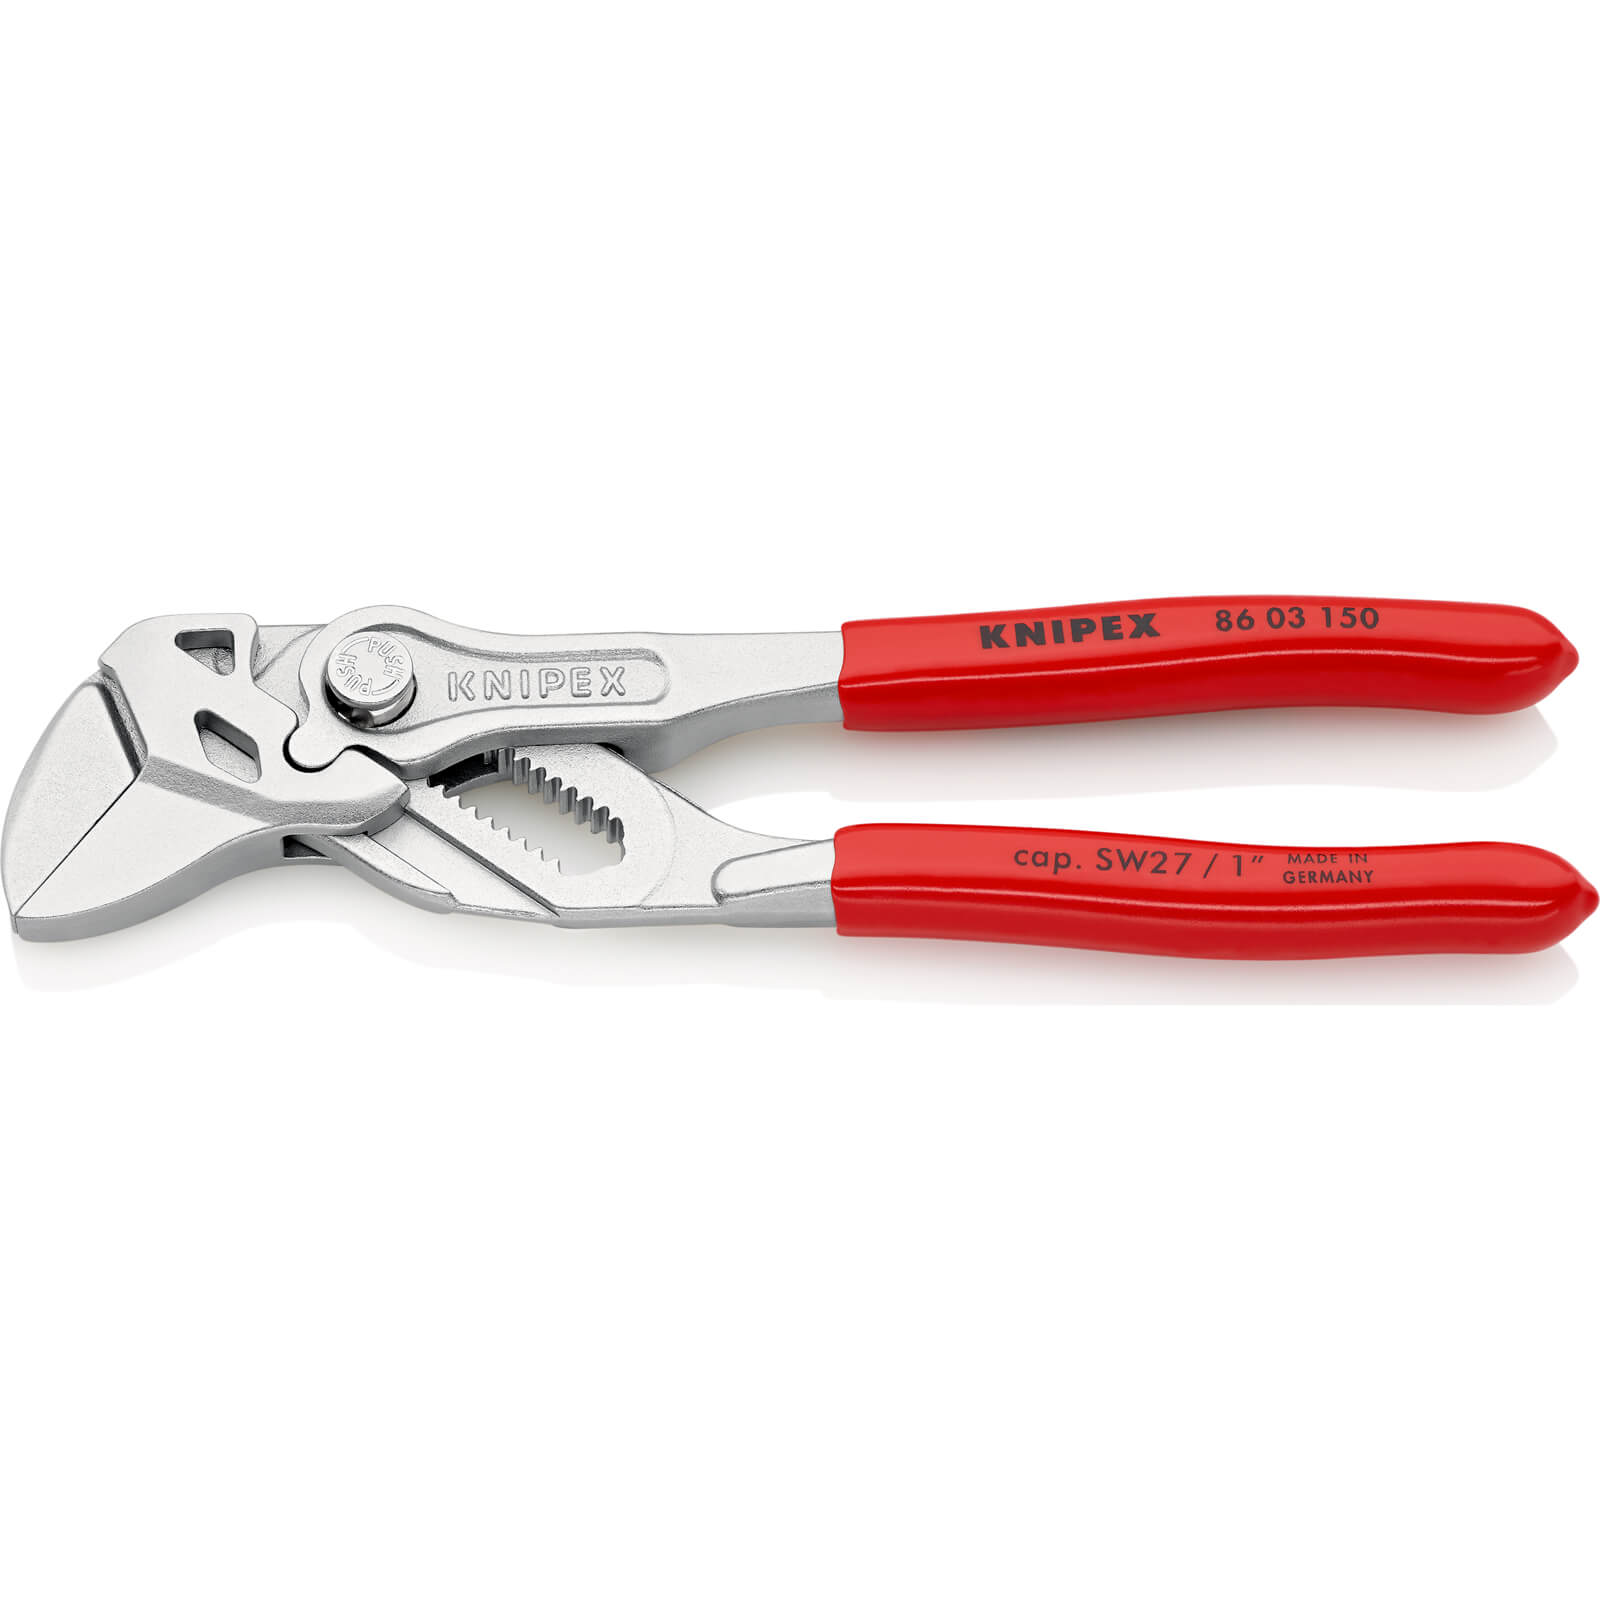 Photo of Knipex 86 03 Chrome Plier Nut Wrenches 150mm